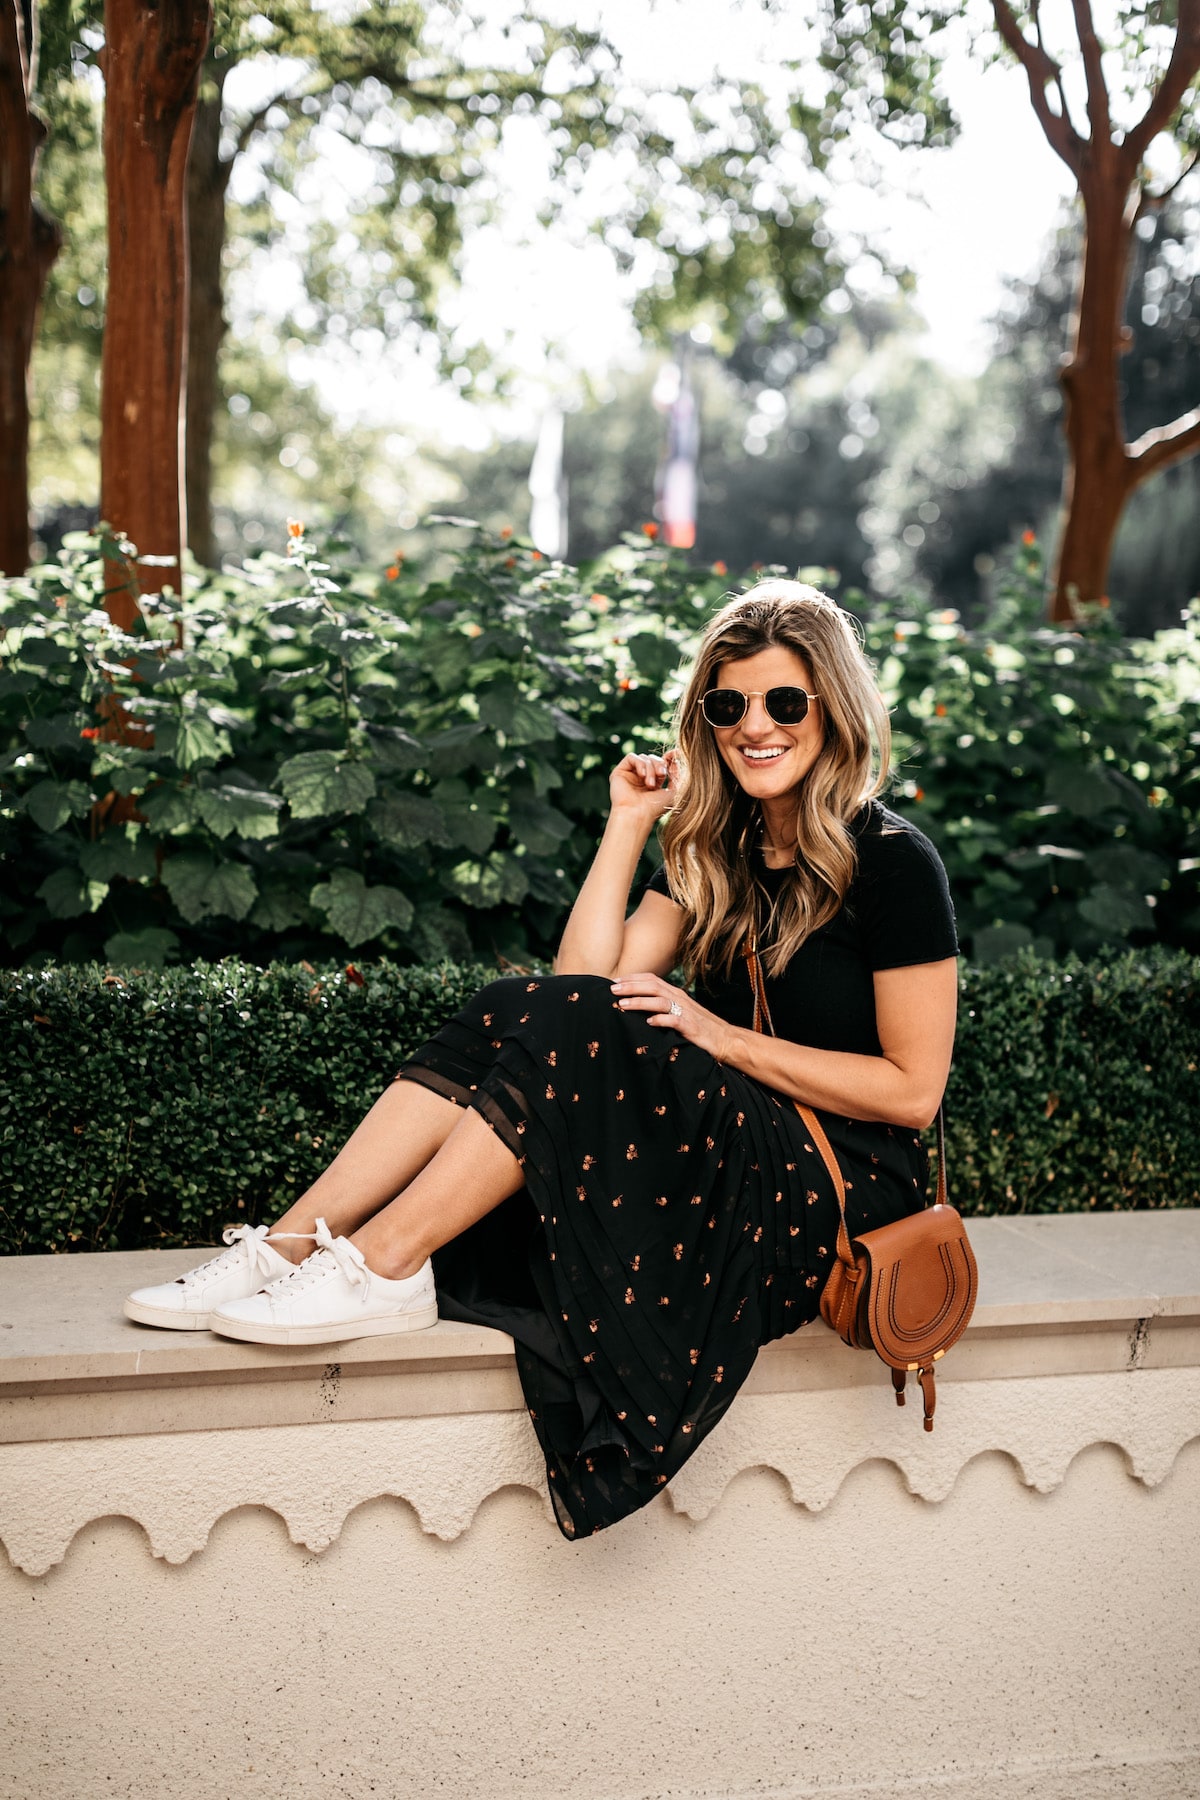 Brighton Butler wearing Madewell Fall Floral Skirt with Black tee and Frye white sneakers